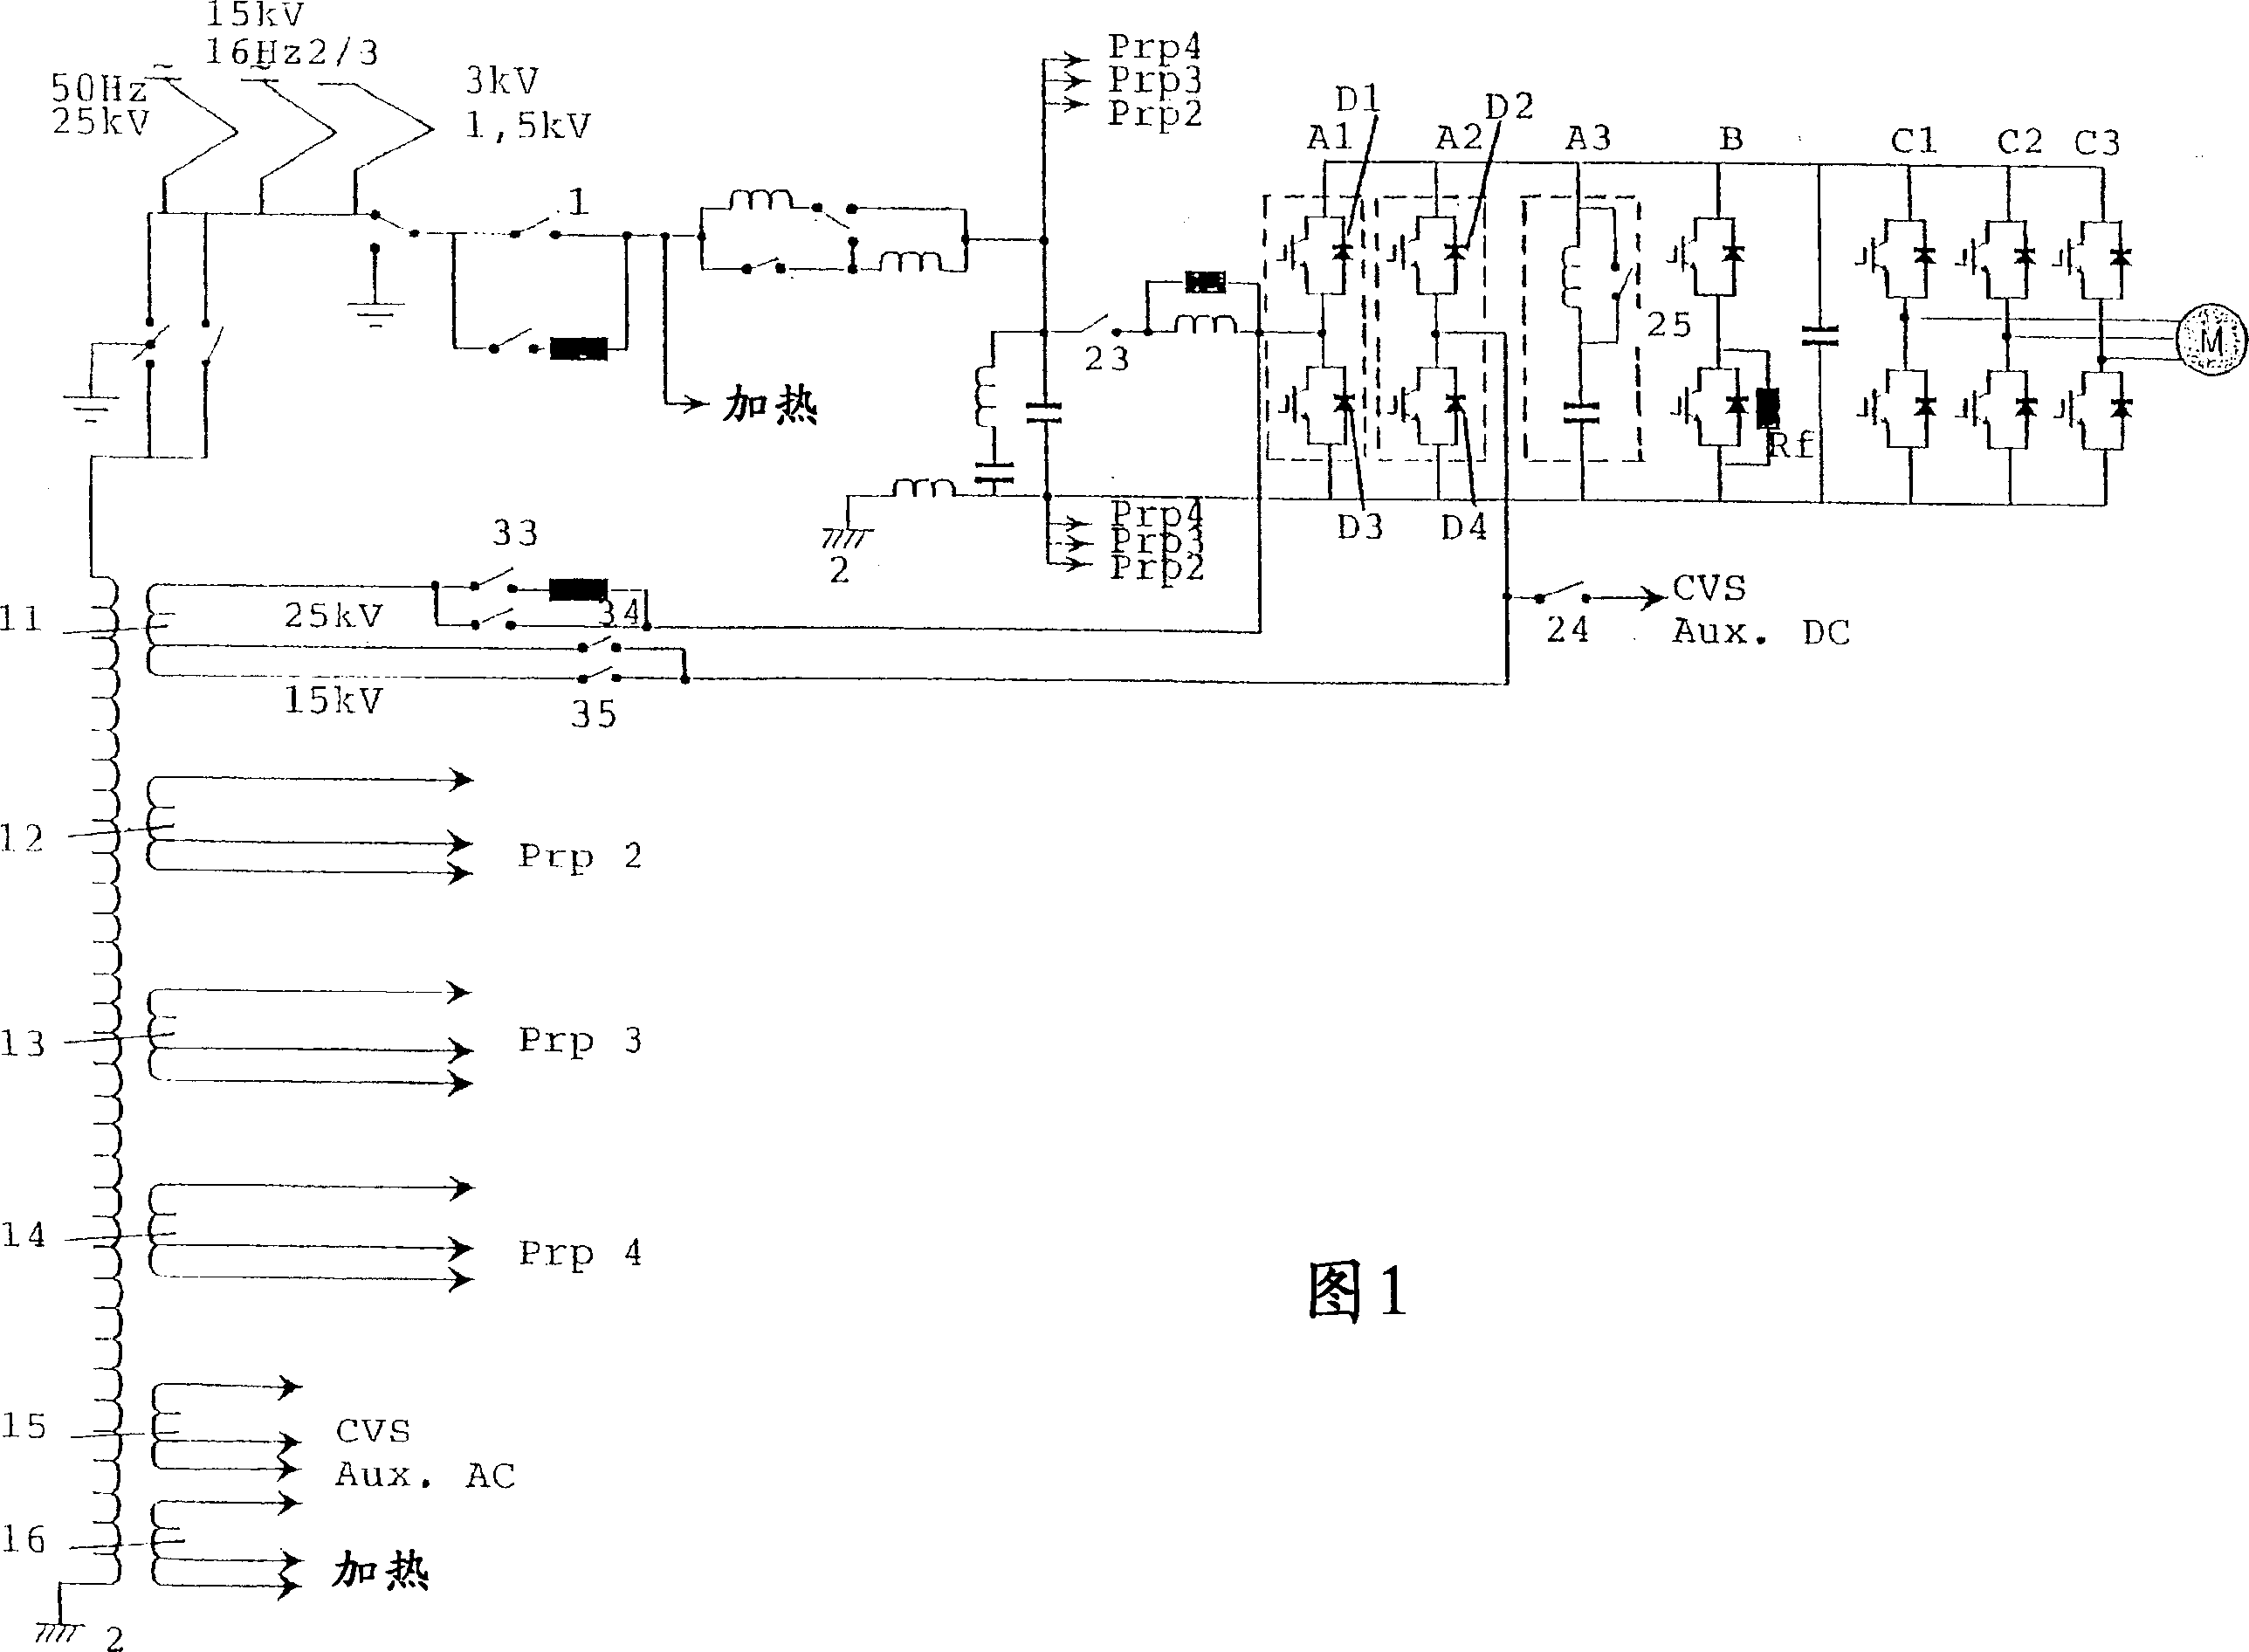 Multiple-voltage power supply for railway vehicle